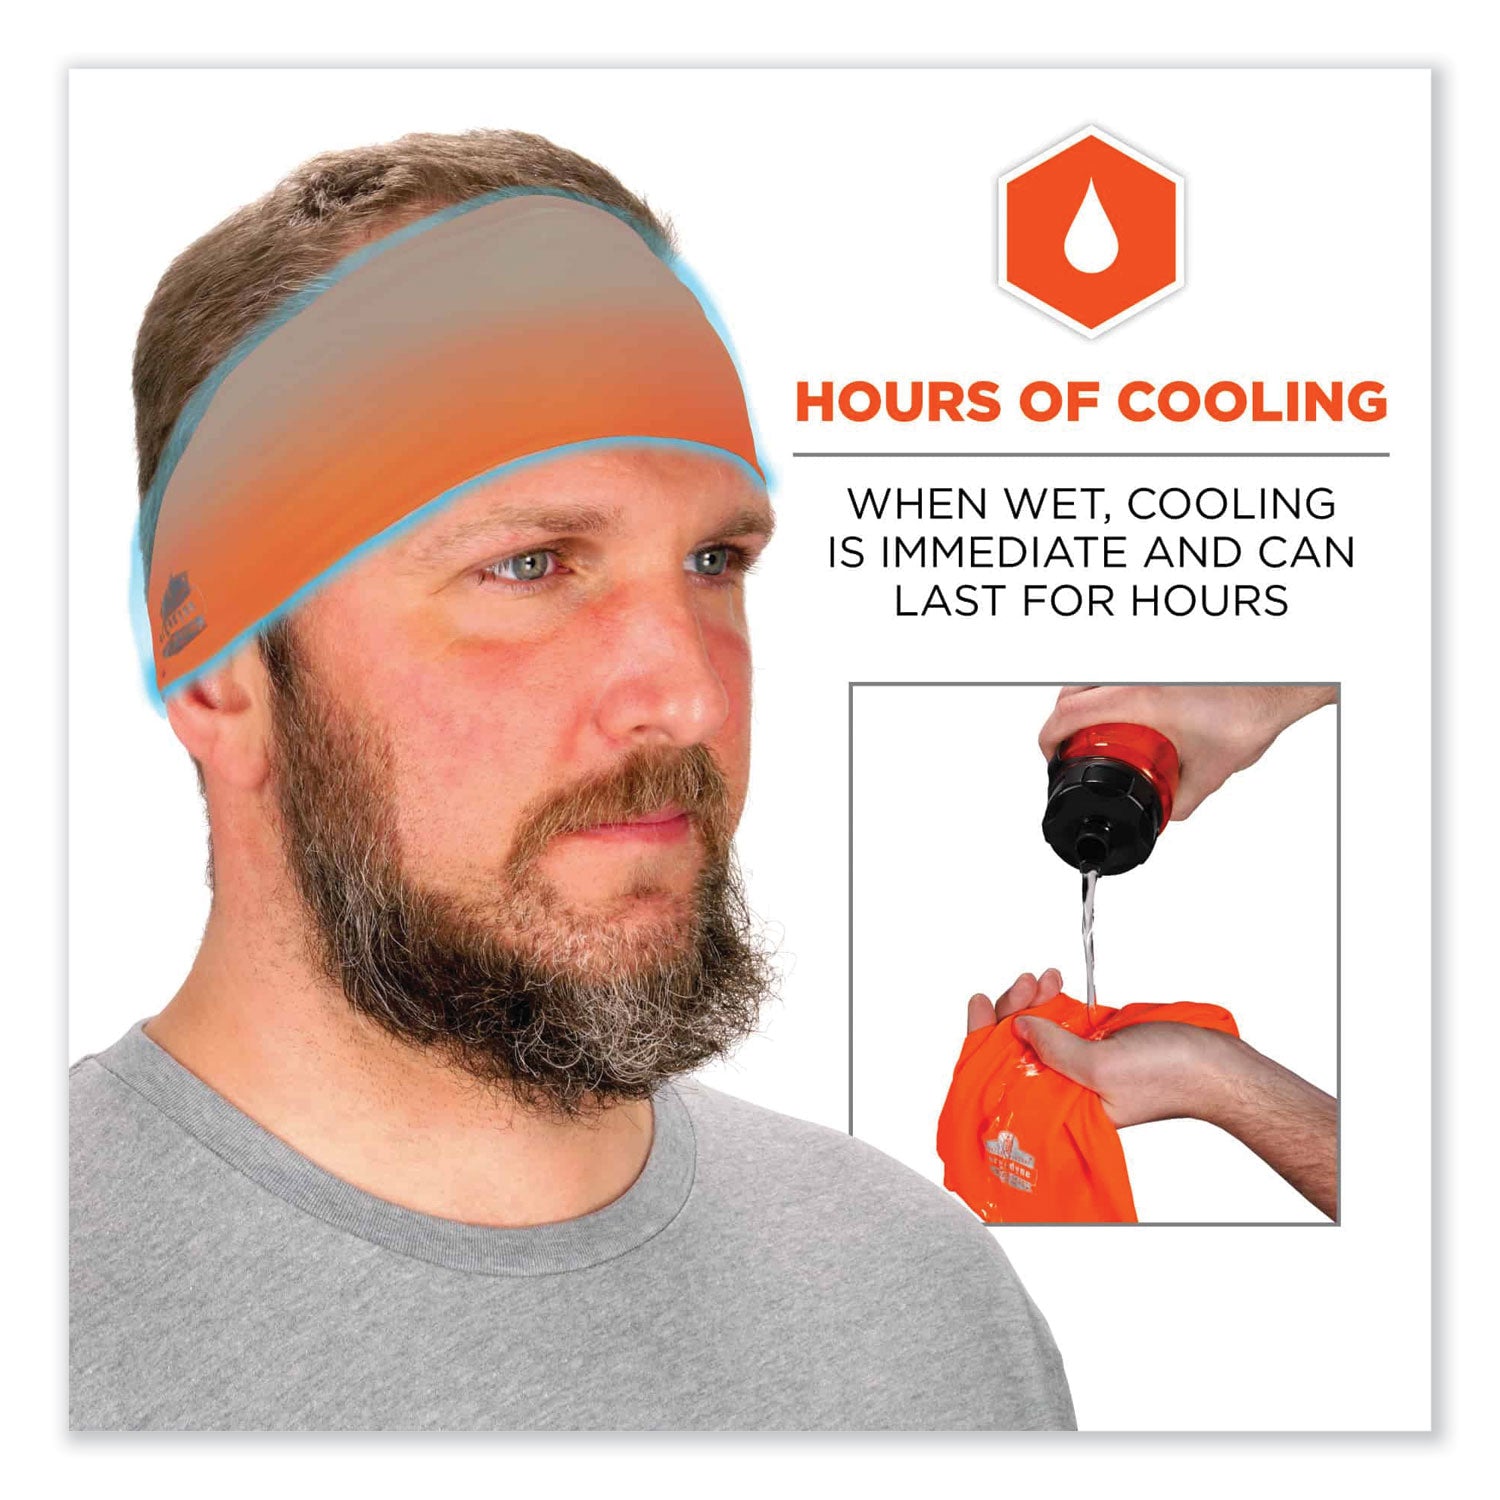 chill-its-6634-performance-knit-cooling-headband-polyester-spandex-one-size-fits-most-orange-ships-in-1-3-business-days_ego12704 - 2